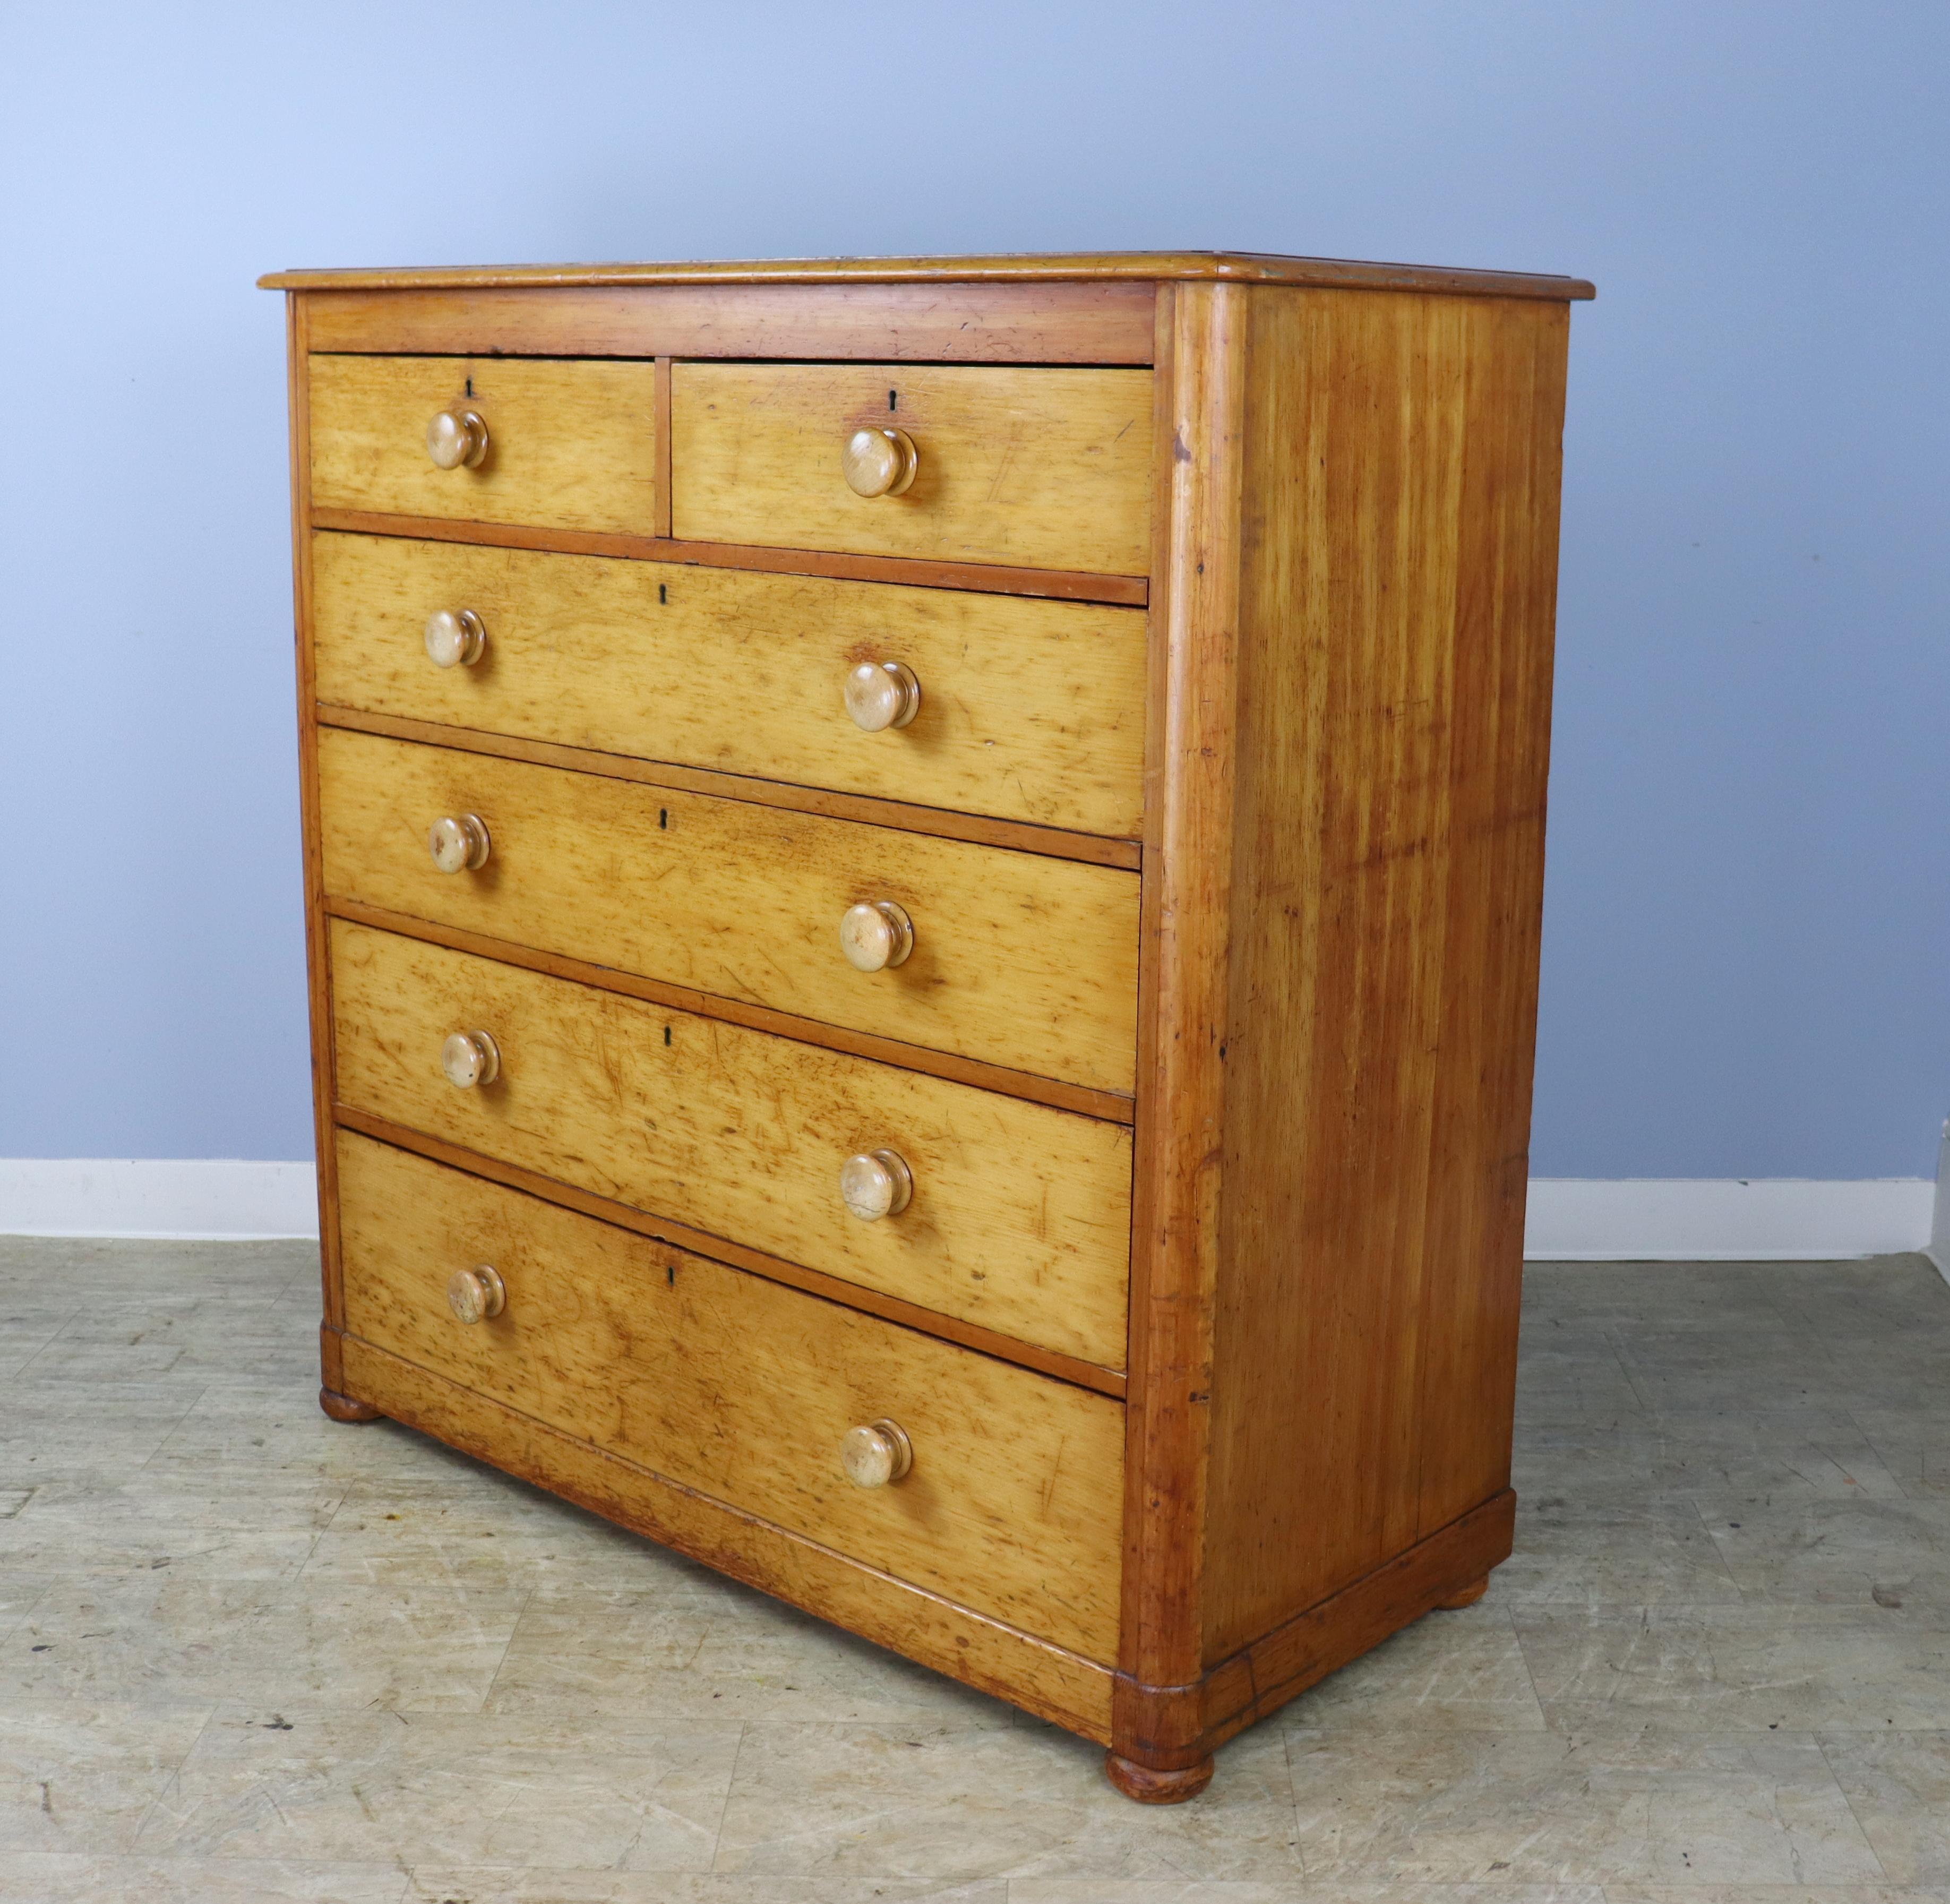 A tall 2 over 4 late Victorian chest of drawers in honey colored pine. While the exterior has lots of original old wear and distress, the interior of the drawers are clean and the drawers close nicely. Small fun feet add a charming note.